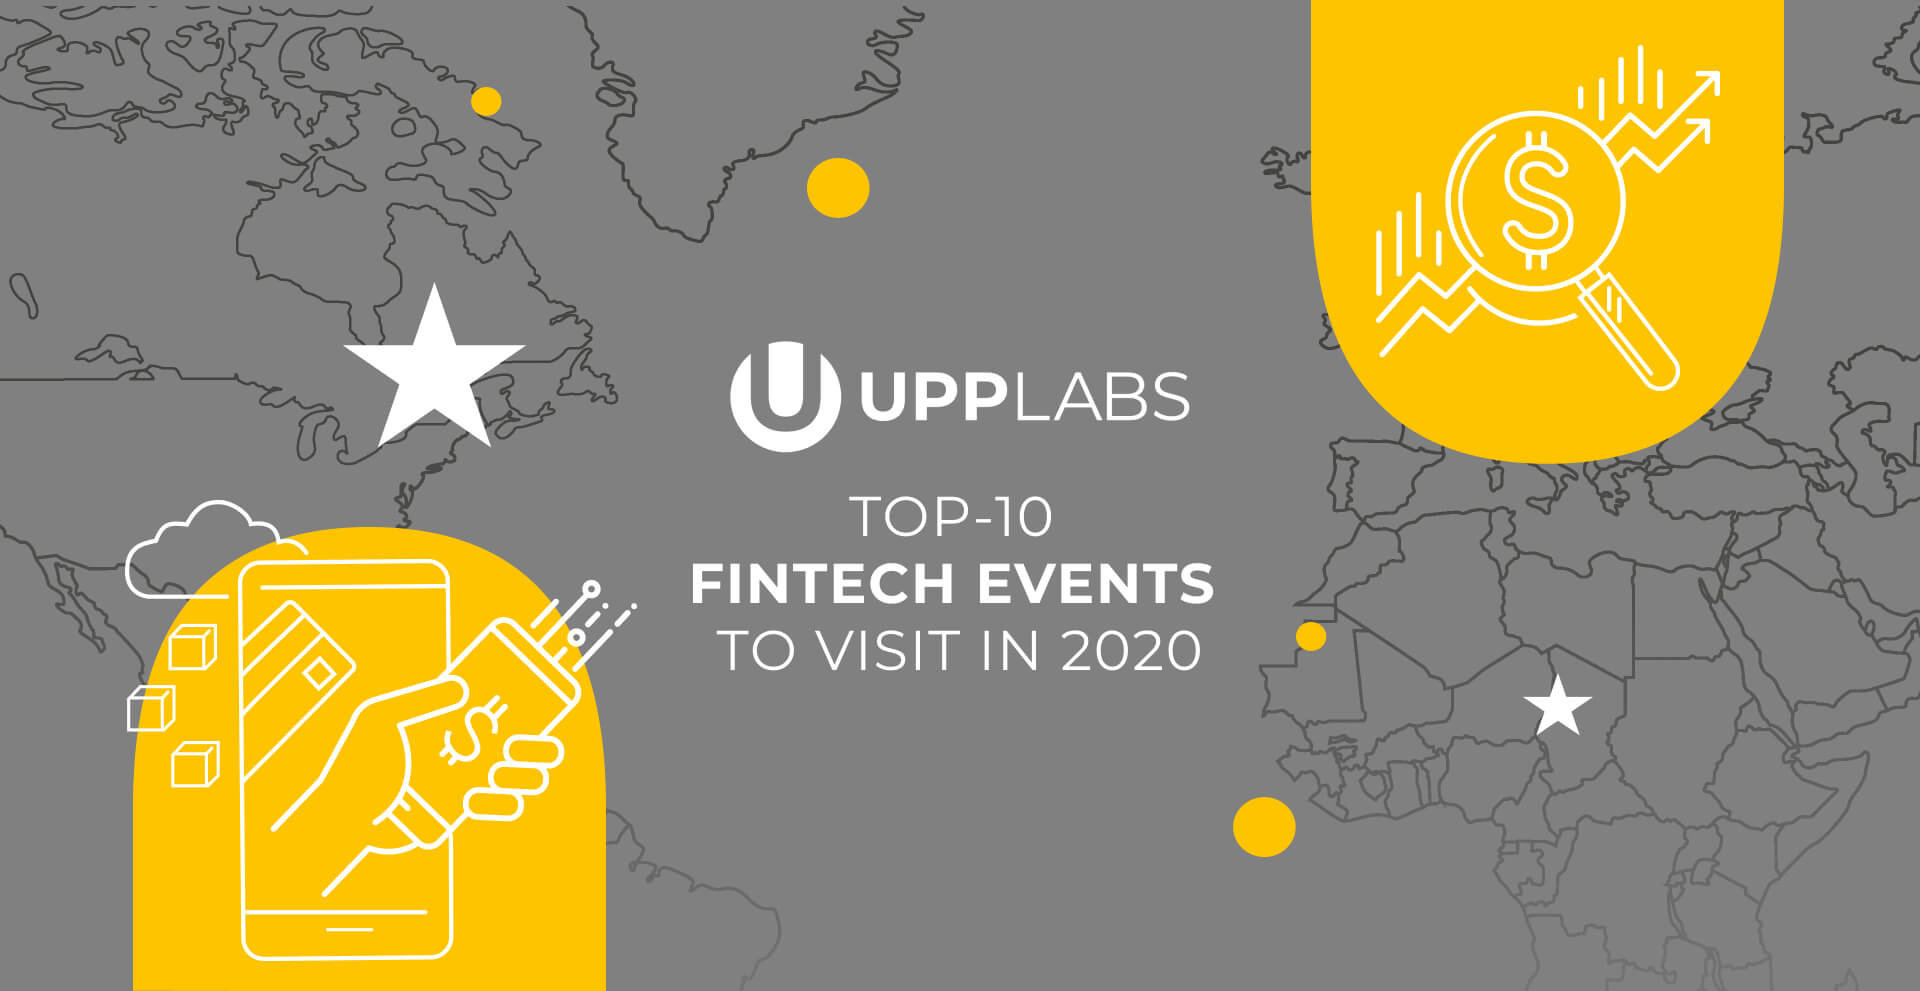 TOP-10 FinTech Events to Visit in 2020. By Upplabs